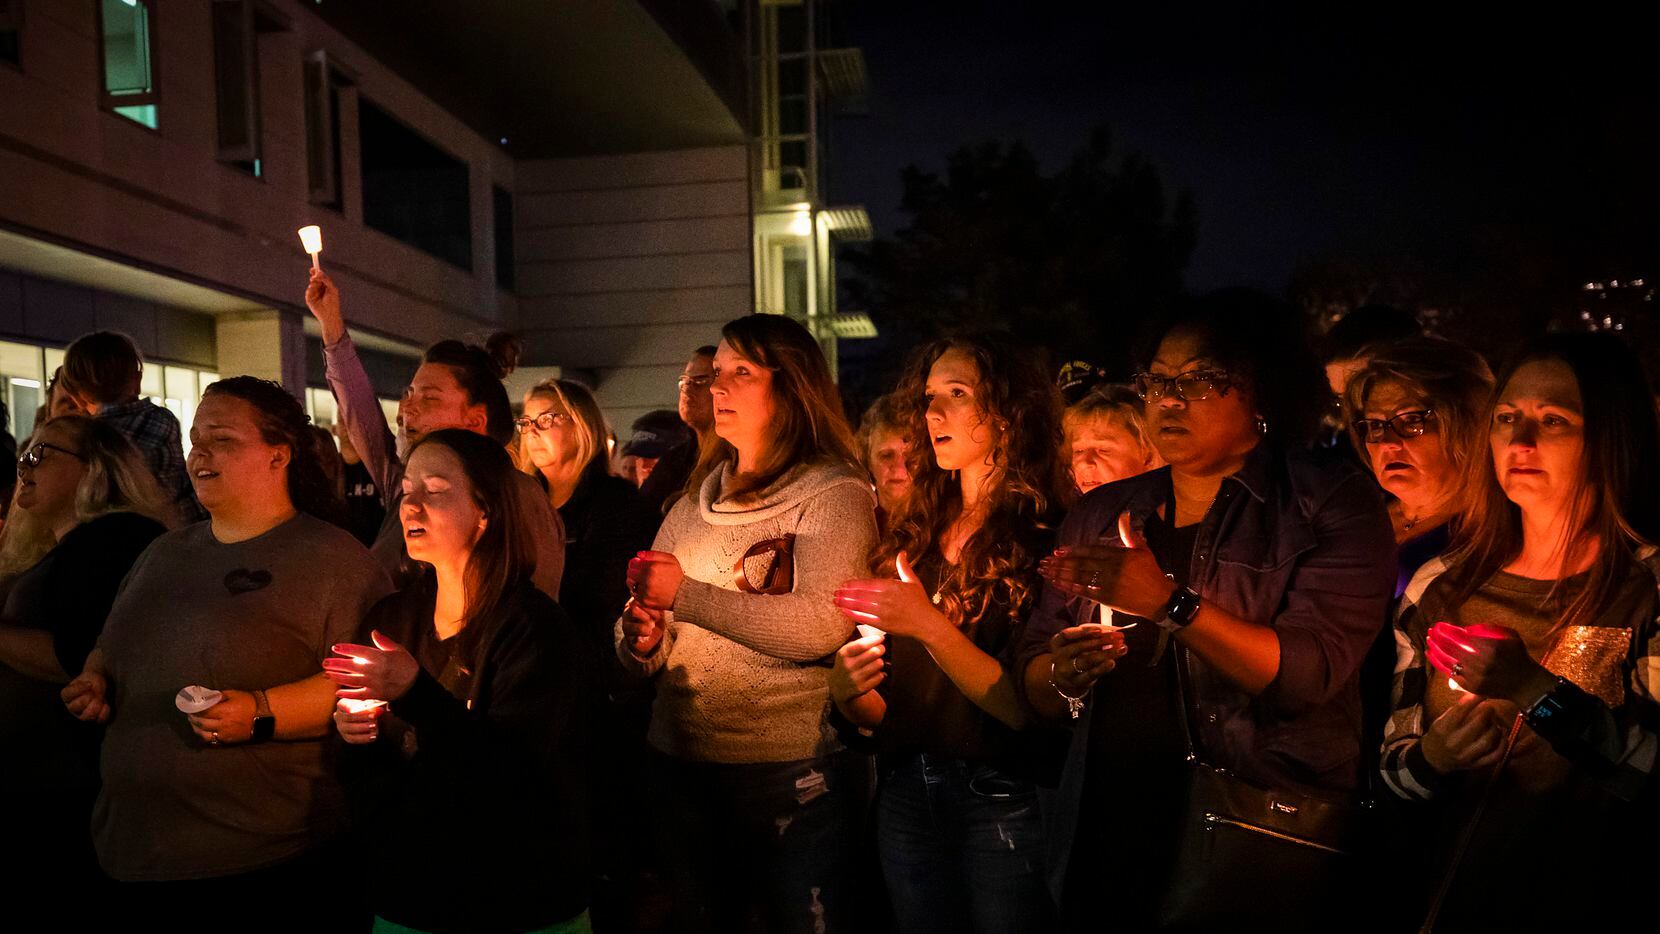 Sunday night's candlelight vigil included prayers and a singing of "Amazing Grace." "Light always overcomes darkness," Nick Edwards, a pastor at Community Life church in Forney, told the more than 1,000 in attendance. (Allison Slomowitz/Special Contributor)